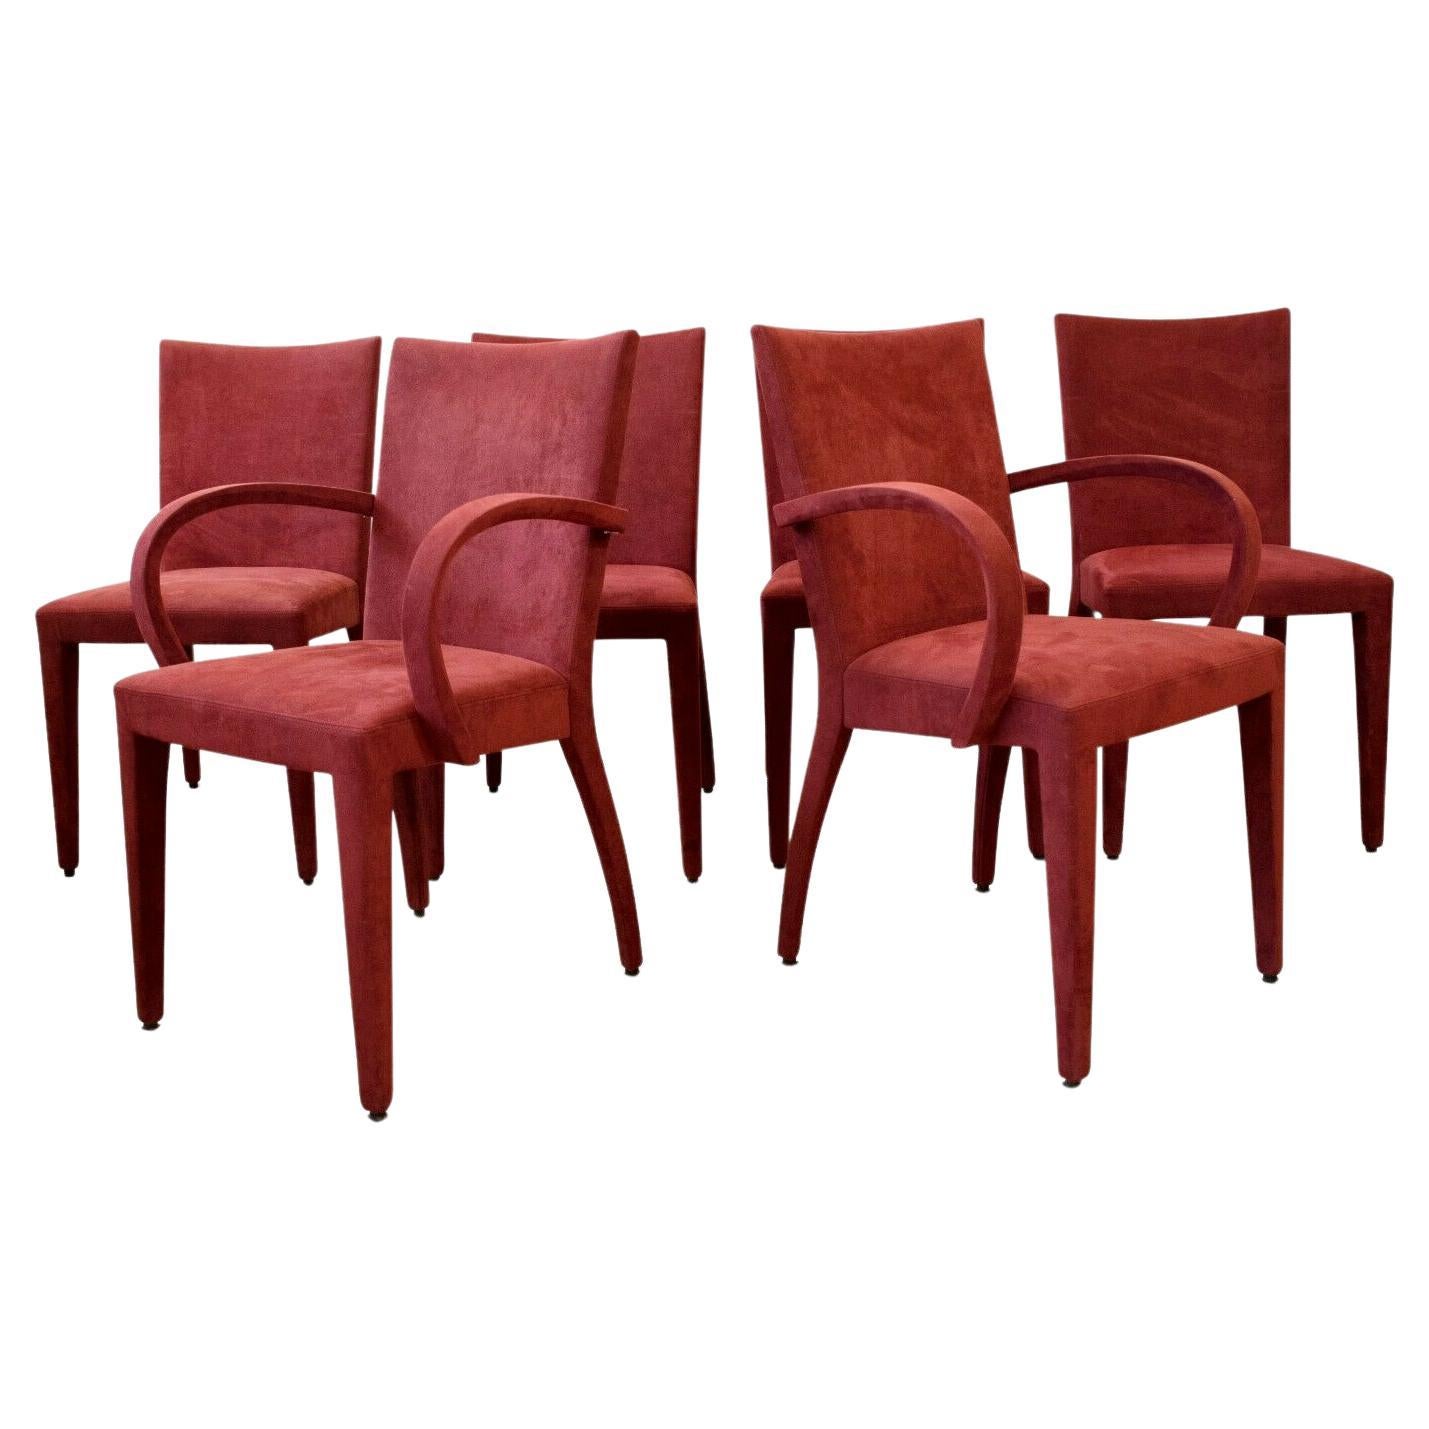 Set of 6 Roche Bobois Red Suede Dining Chairs